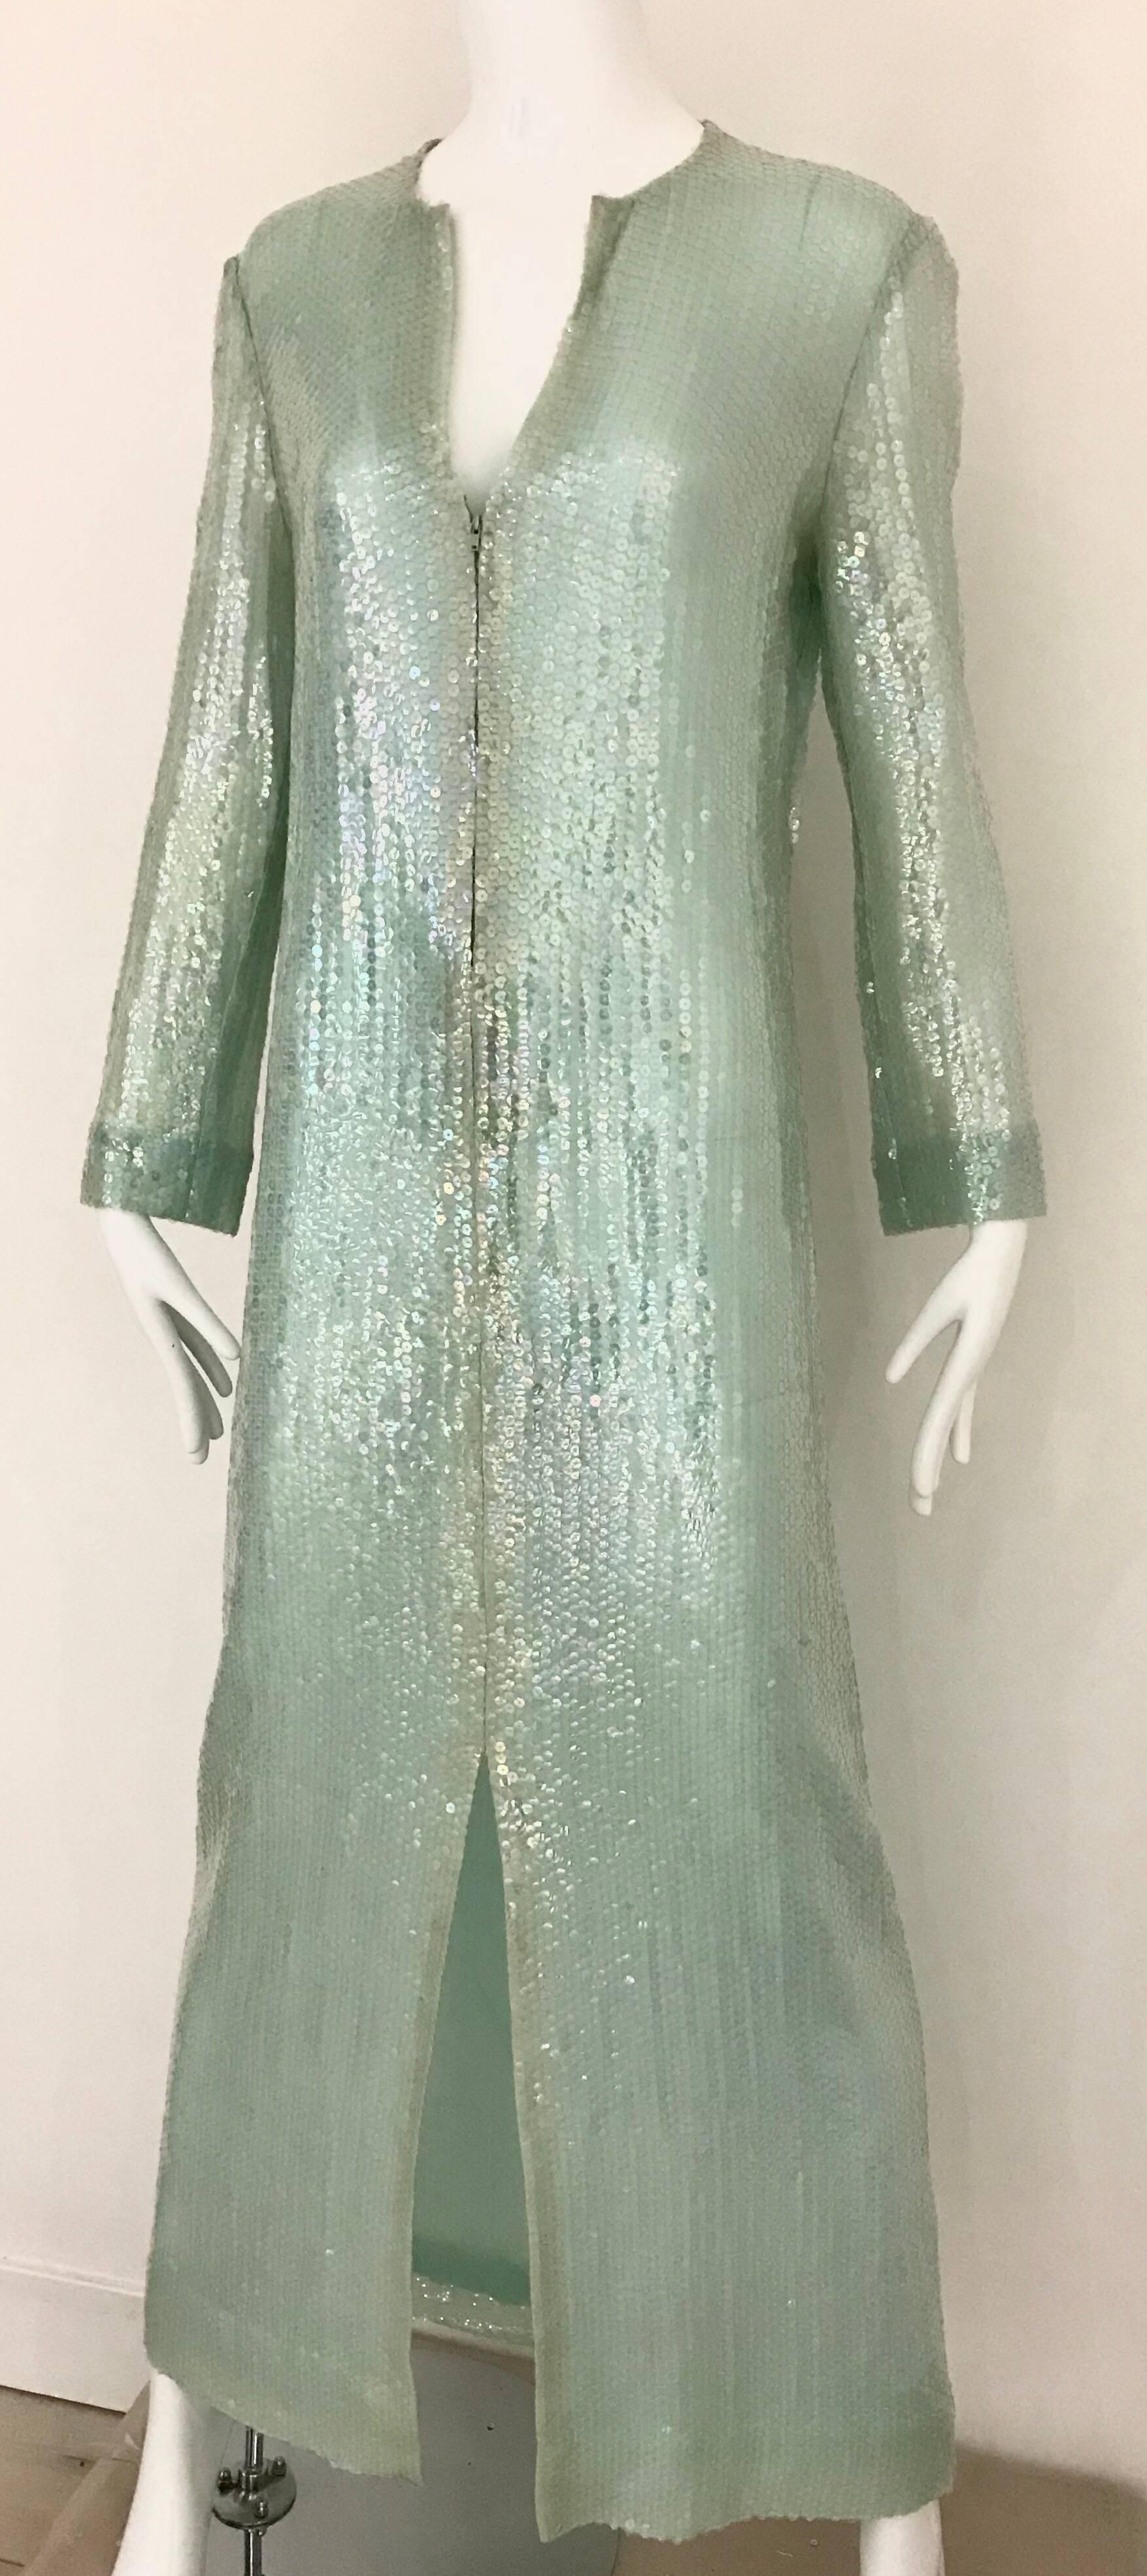 Vintage 70s Halston light green iridescent sequin caftan dress with zipper and belt.
Dress has zipper in the middle and thin belt. Size 6/ Medium
Bust: 38 inches/ Waist: 34 inches/ Hip: 37 inches Dress Length: 57 inches
Arm length from shoulder- 22